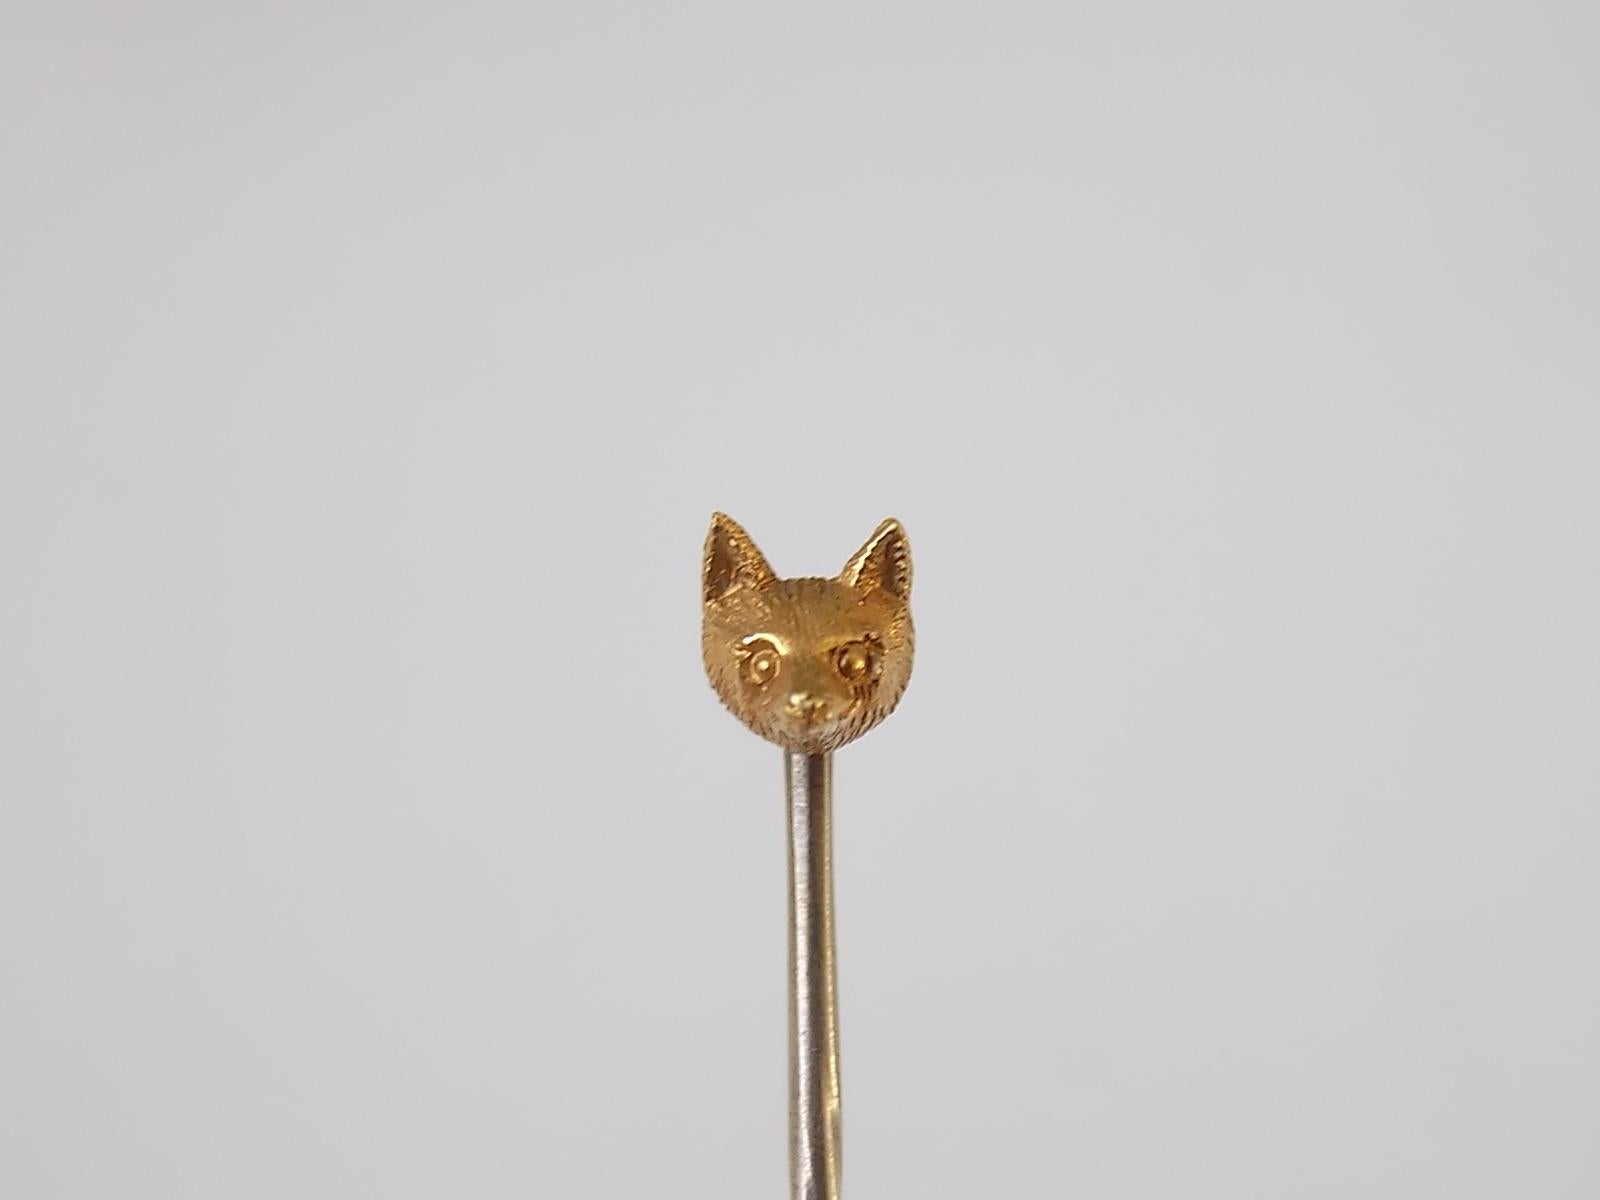 A Cute Victorian c.1890 15 Carat Yellow Gold Tiny Fox Head Mask stick pin. English origin.
Width of the Fox head 4mm, height 5mm .
Total length of the pin  46mm.
Marked 15CT for 15 Carat Gold.
The pin in very good condition for the age and ready to